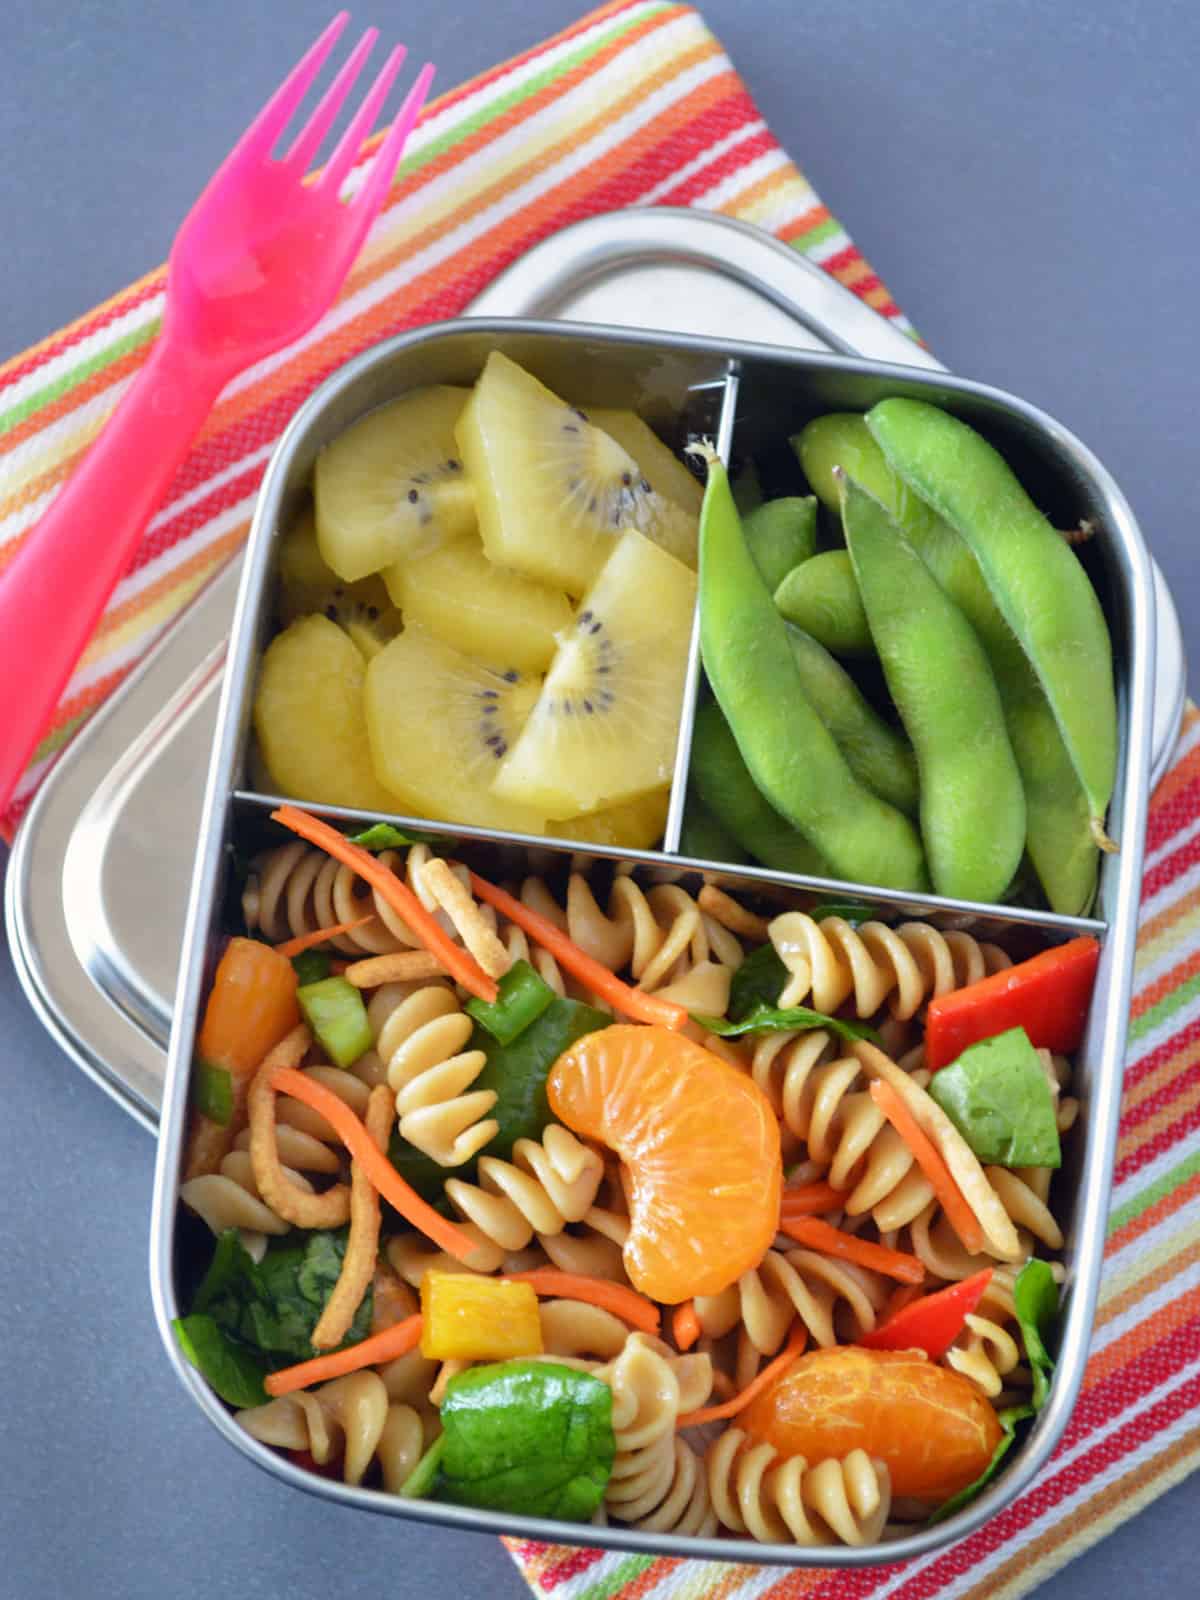 Metal bento box filled with pasta salad, kiwi and edamame on striped napkin and a pink plastic fork